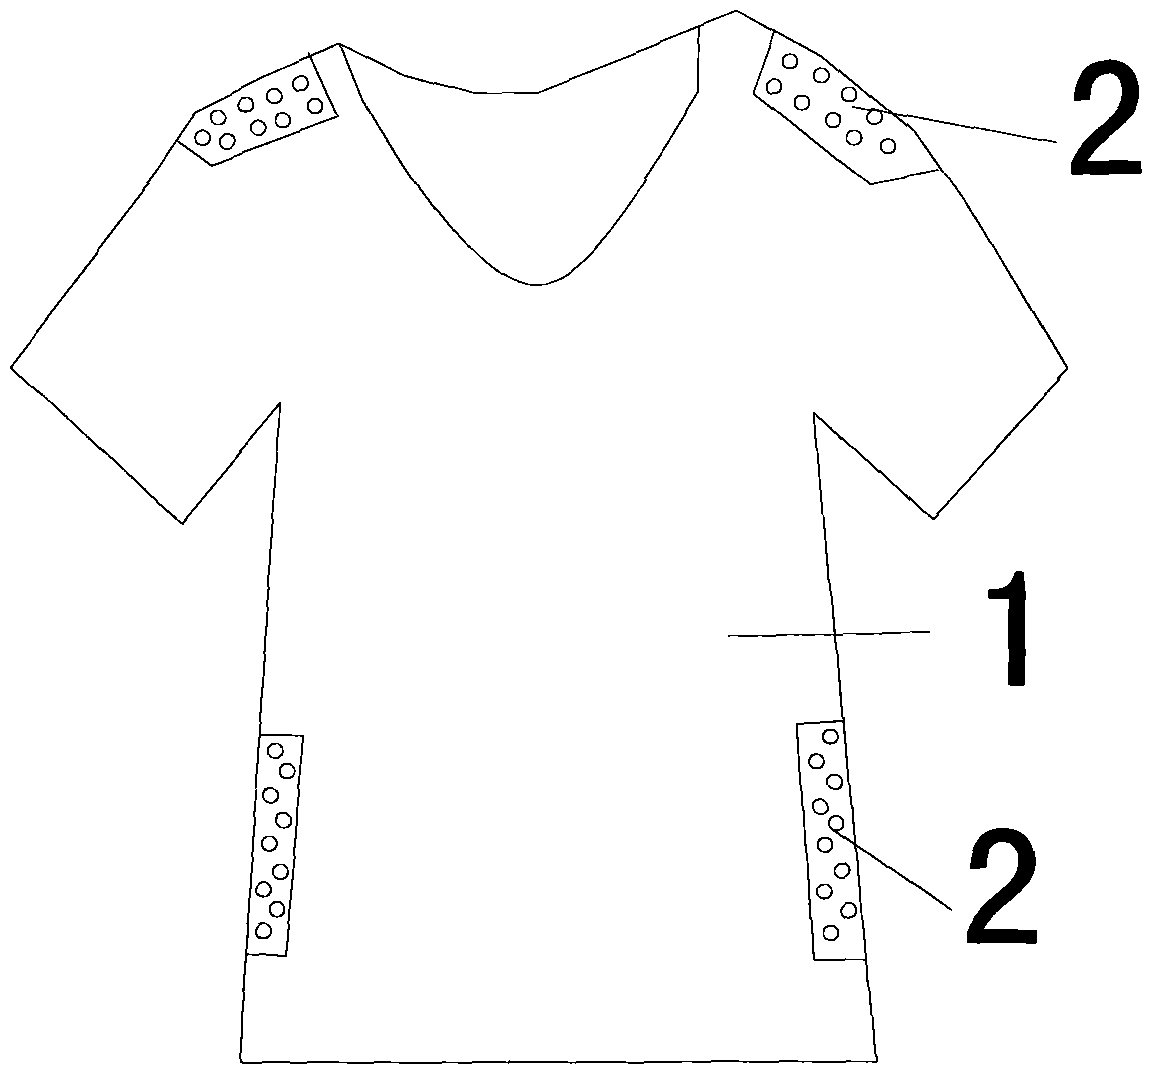 T-shirt with meshes and capability of generating stereoscopic impression